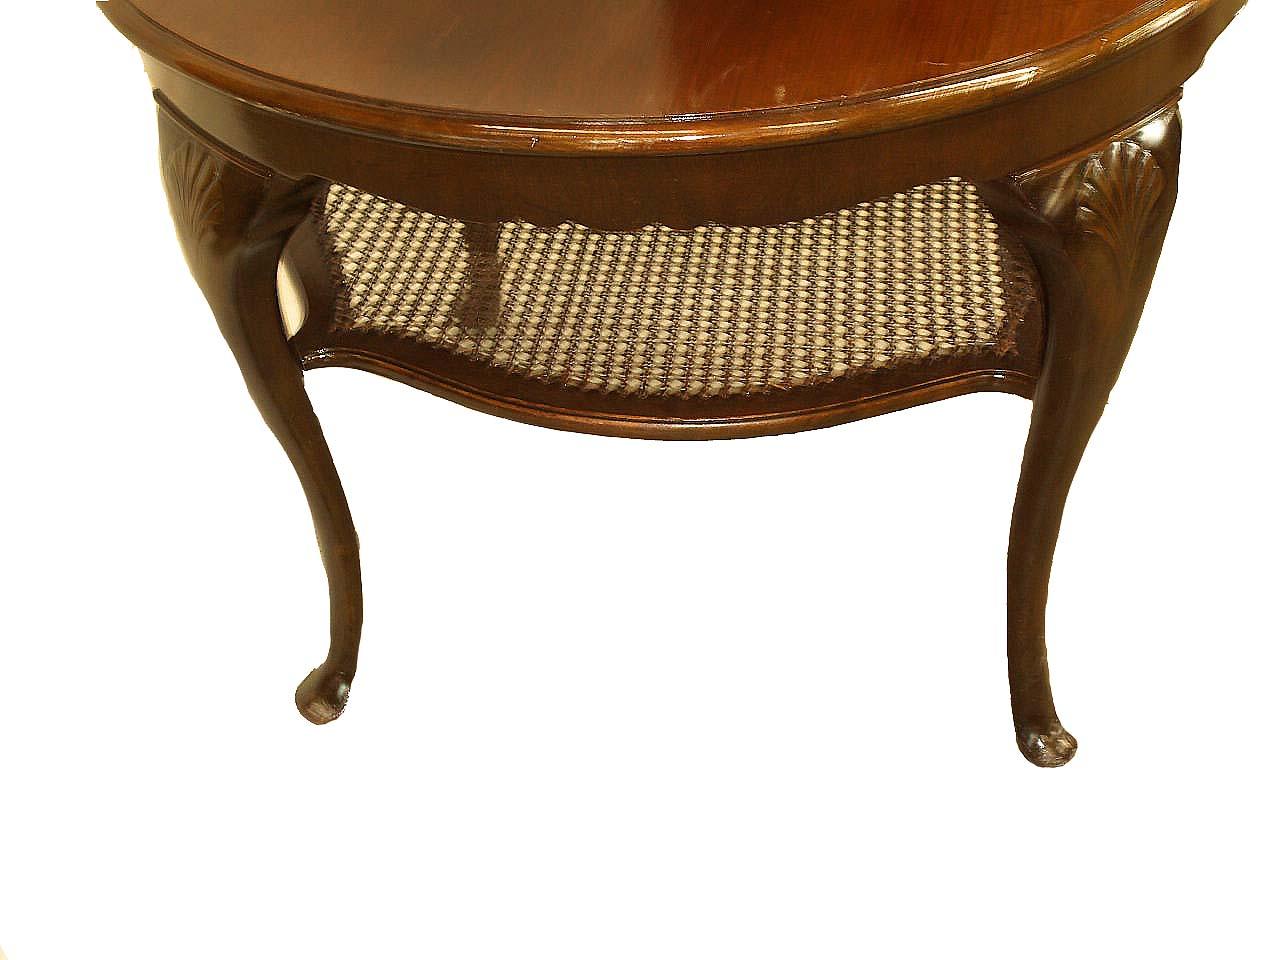 Queen Anne mahogany center table, with nicely figured round top, serpentine shaped cane shelf below. The cabriole legs have a carved shell on the knee terminating with a pad foot.